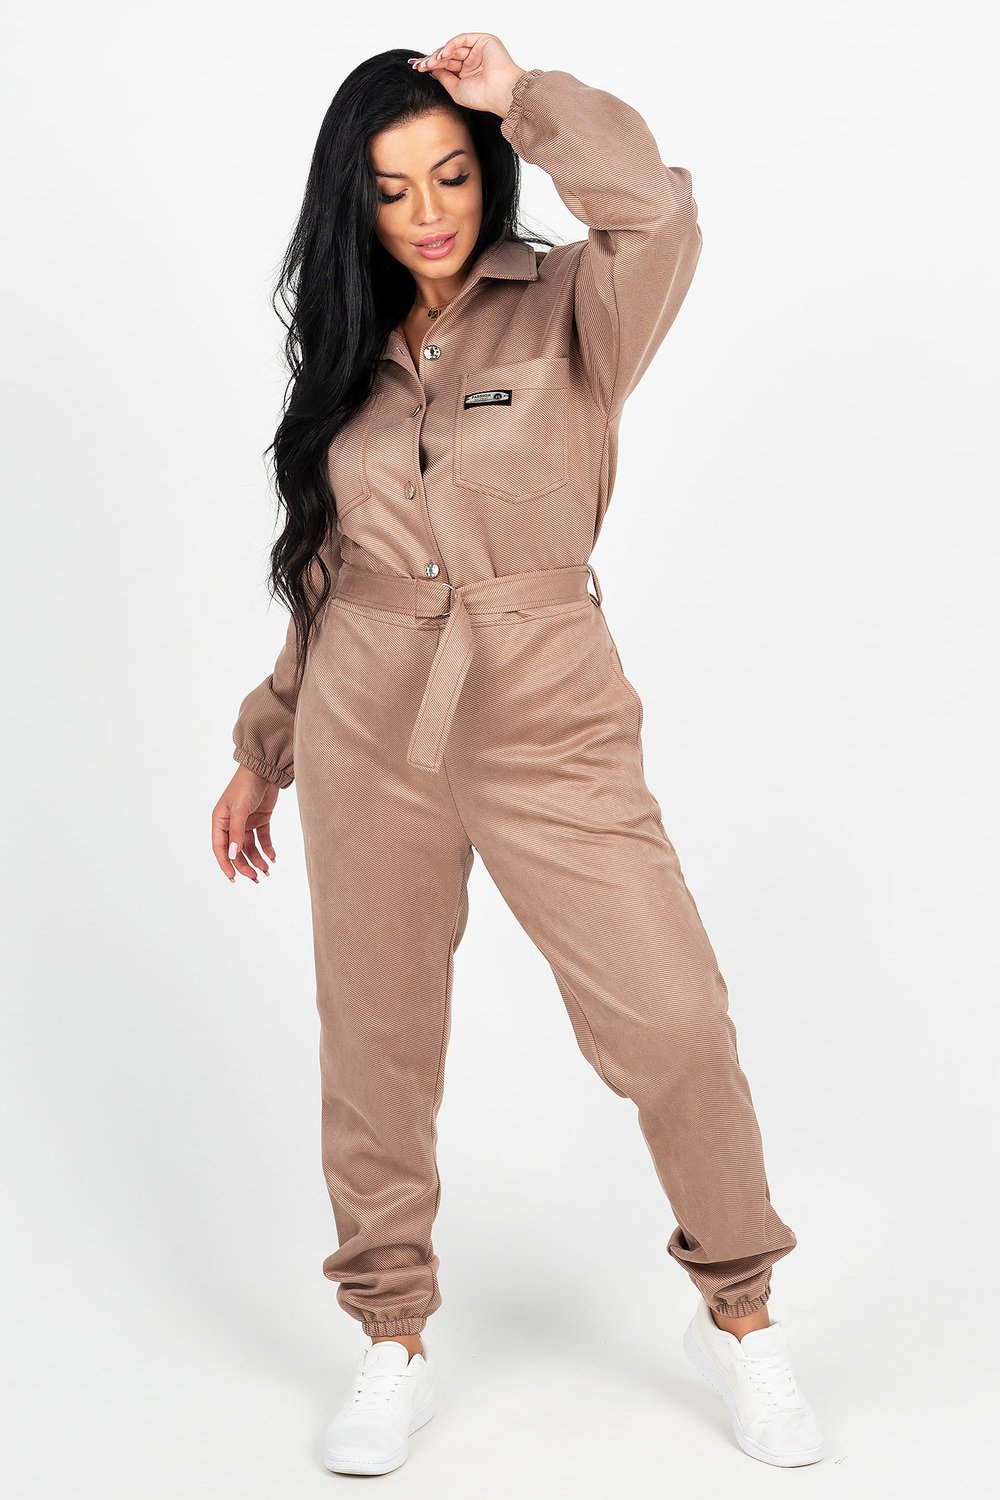 Missguided hooded jumpsuit in cream